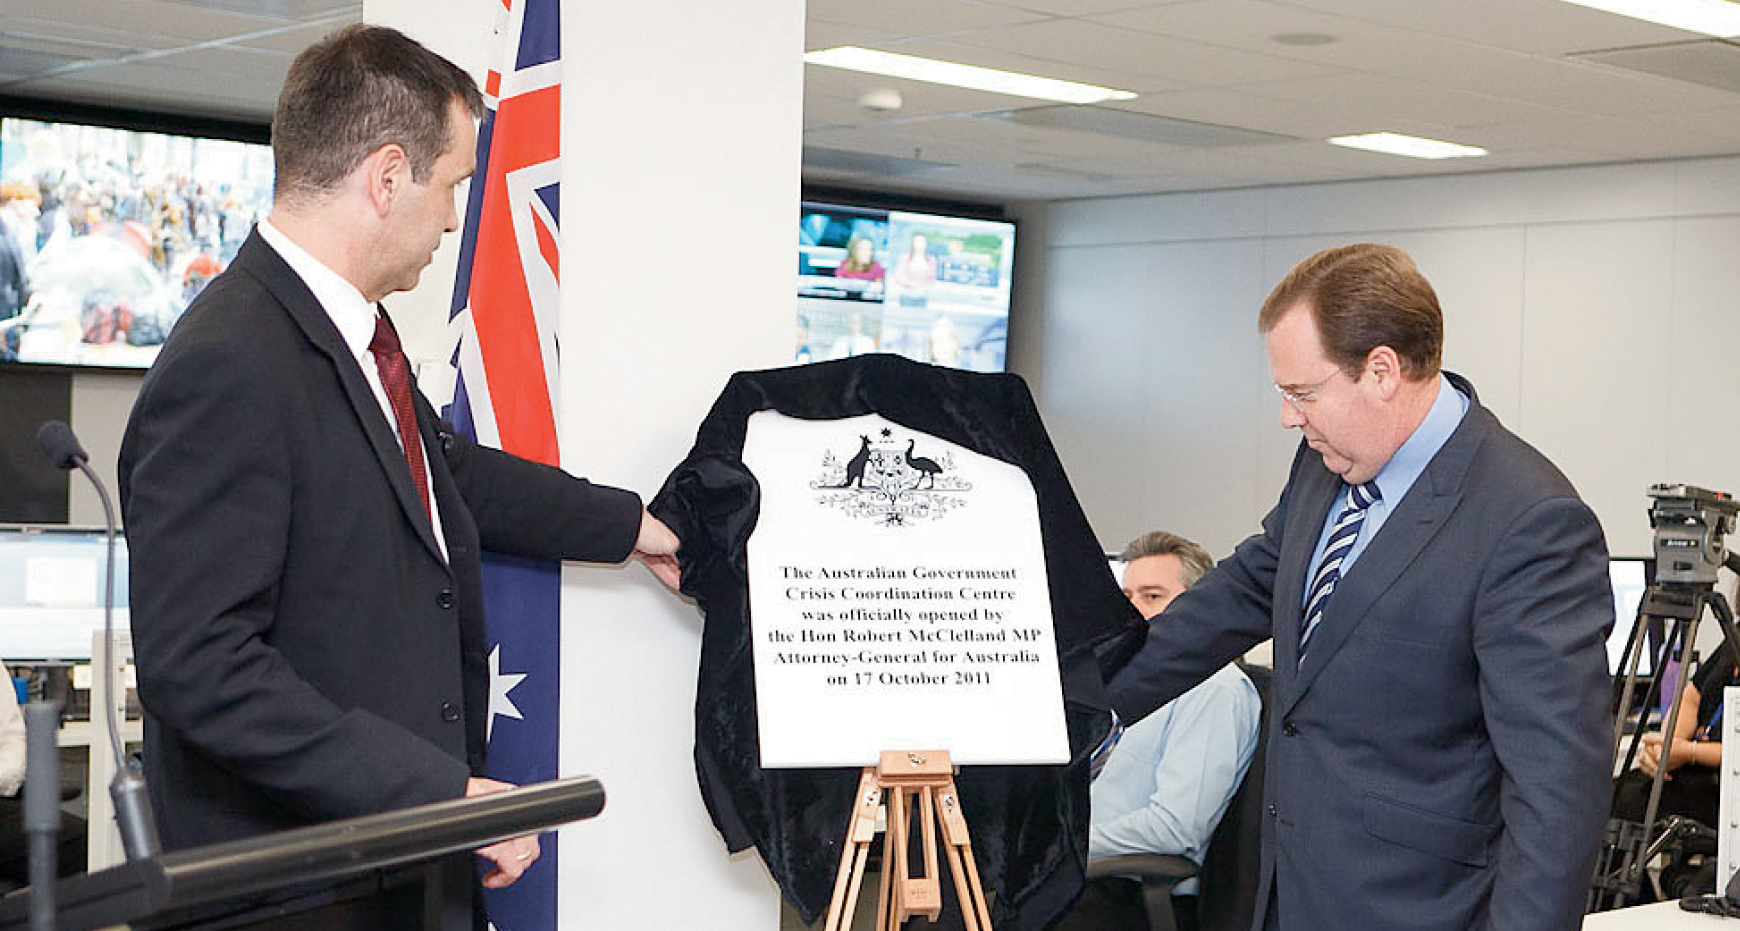 Photograph of the Hon Robert McClelland unveiling a plaque at the opening of the Crisis Coordination Centre, with CCC staff